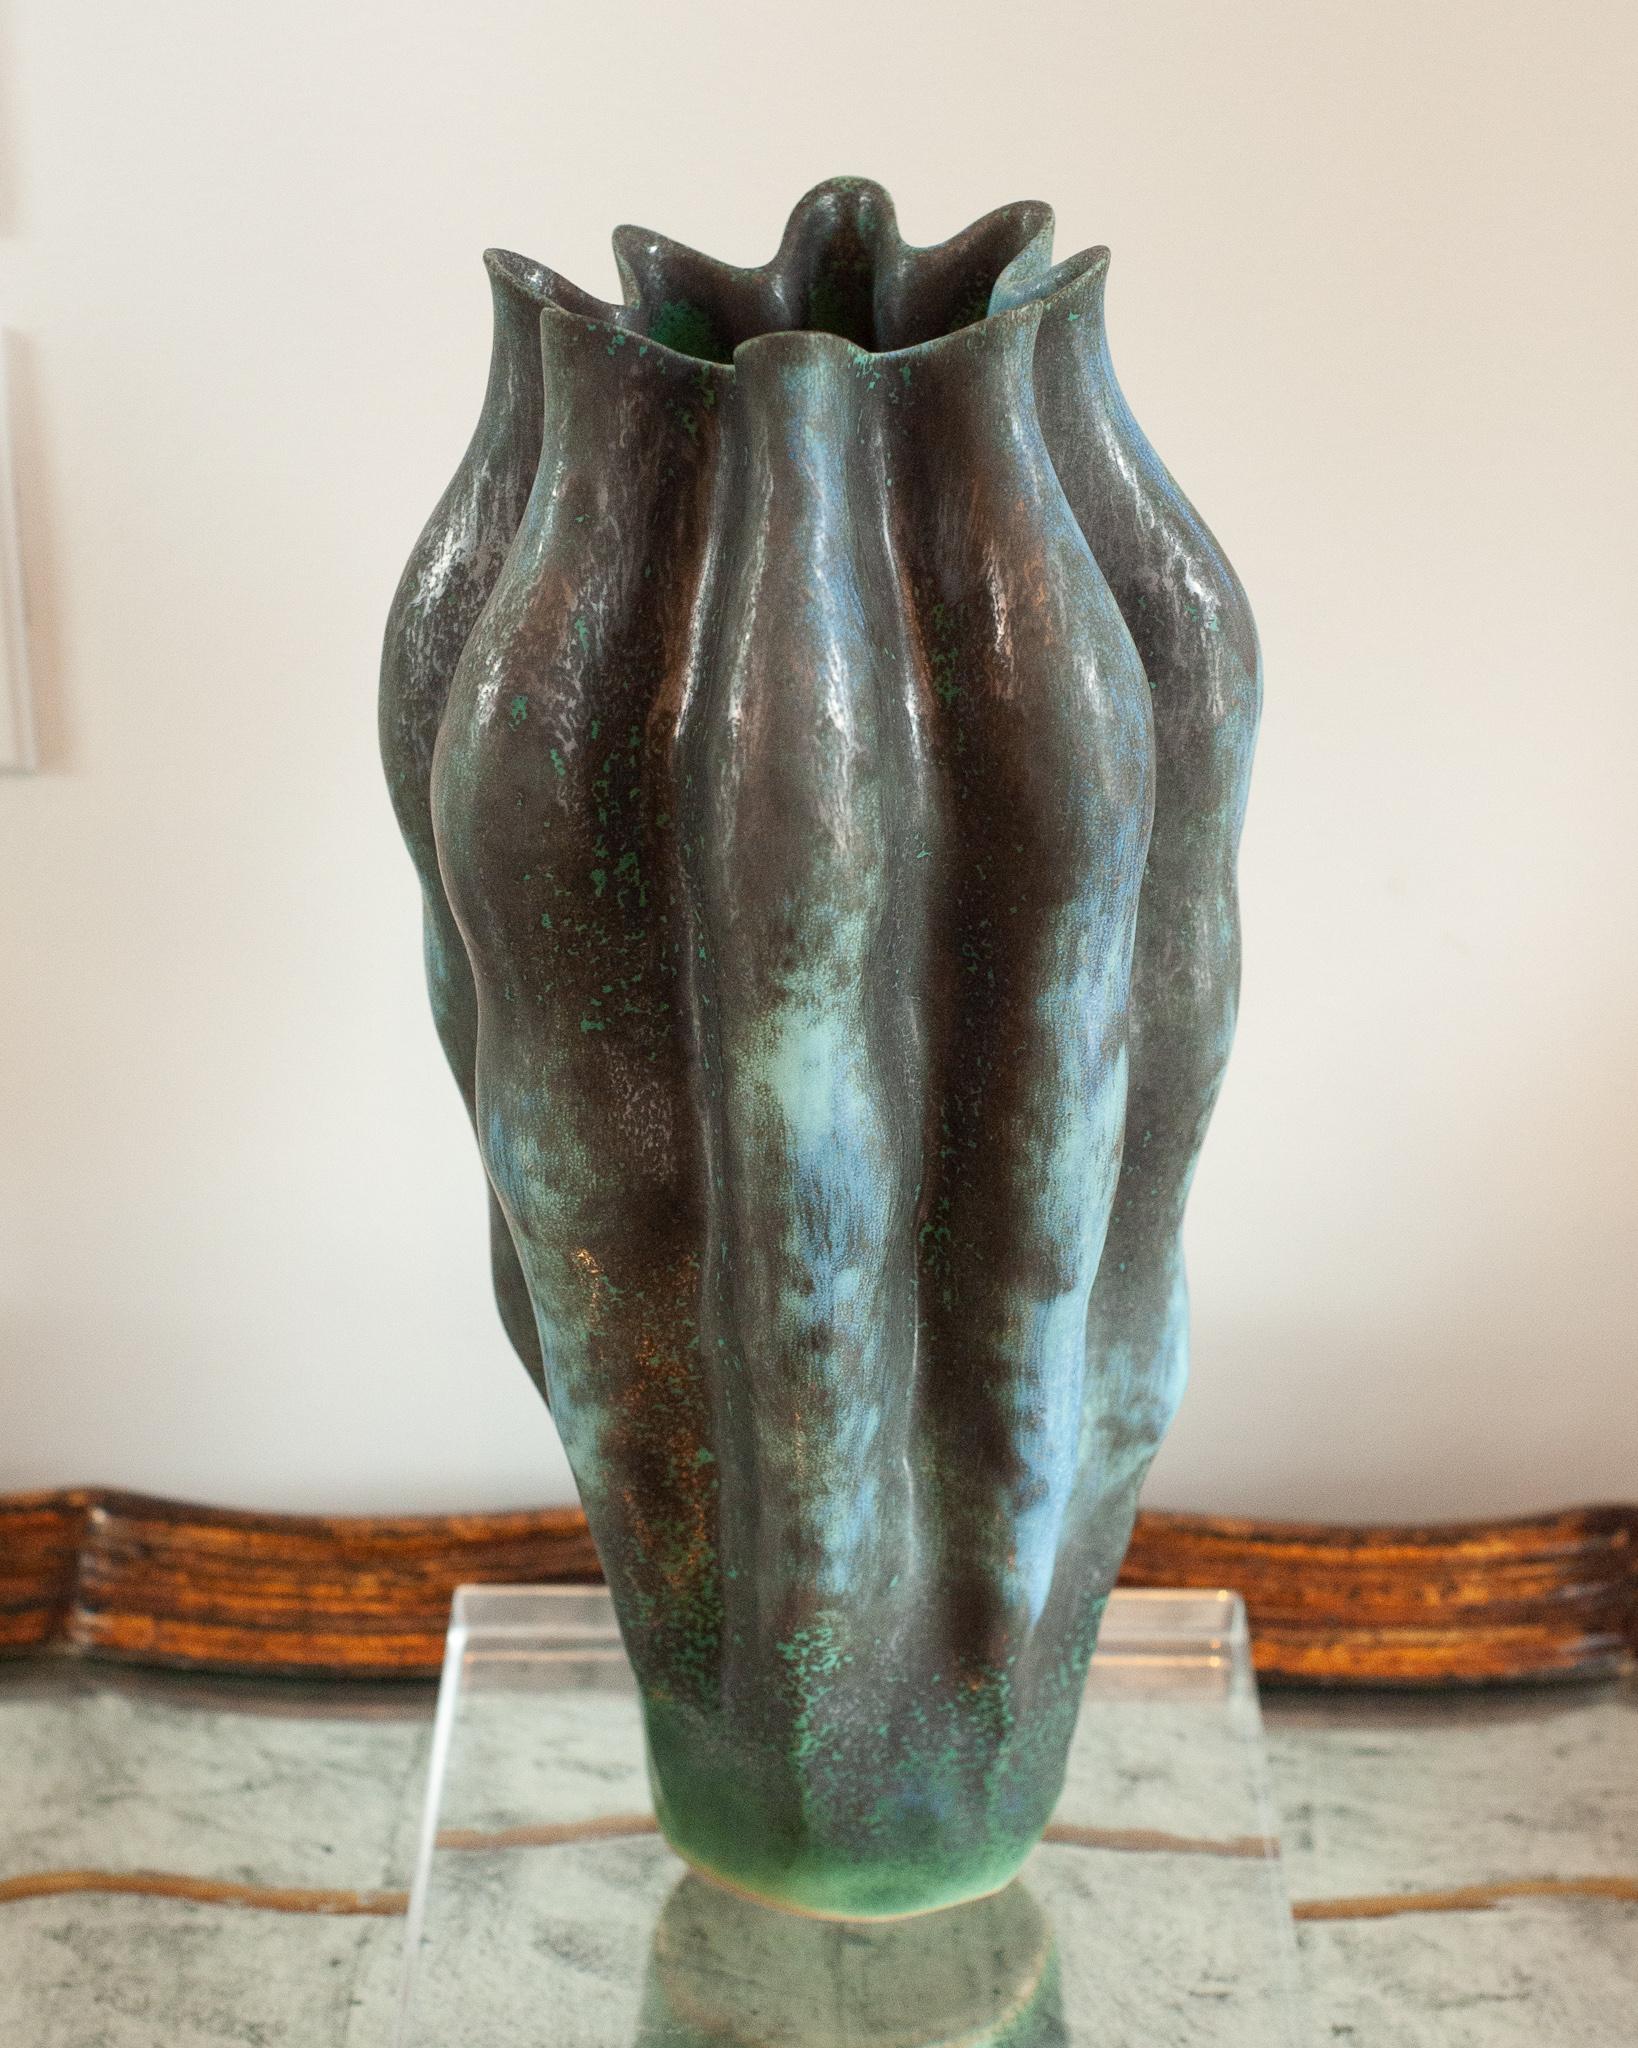 A beautiful large green and metallic glazed vase created by applying layered reactive glazes onto fine porcelain. The perfect large scale sculptural vase that looks gorgeous with or without flowers to fill it.